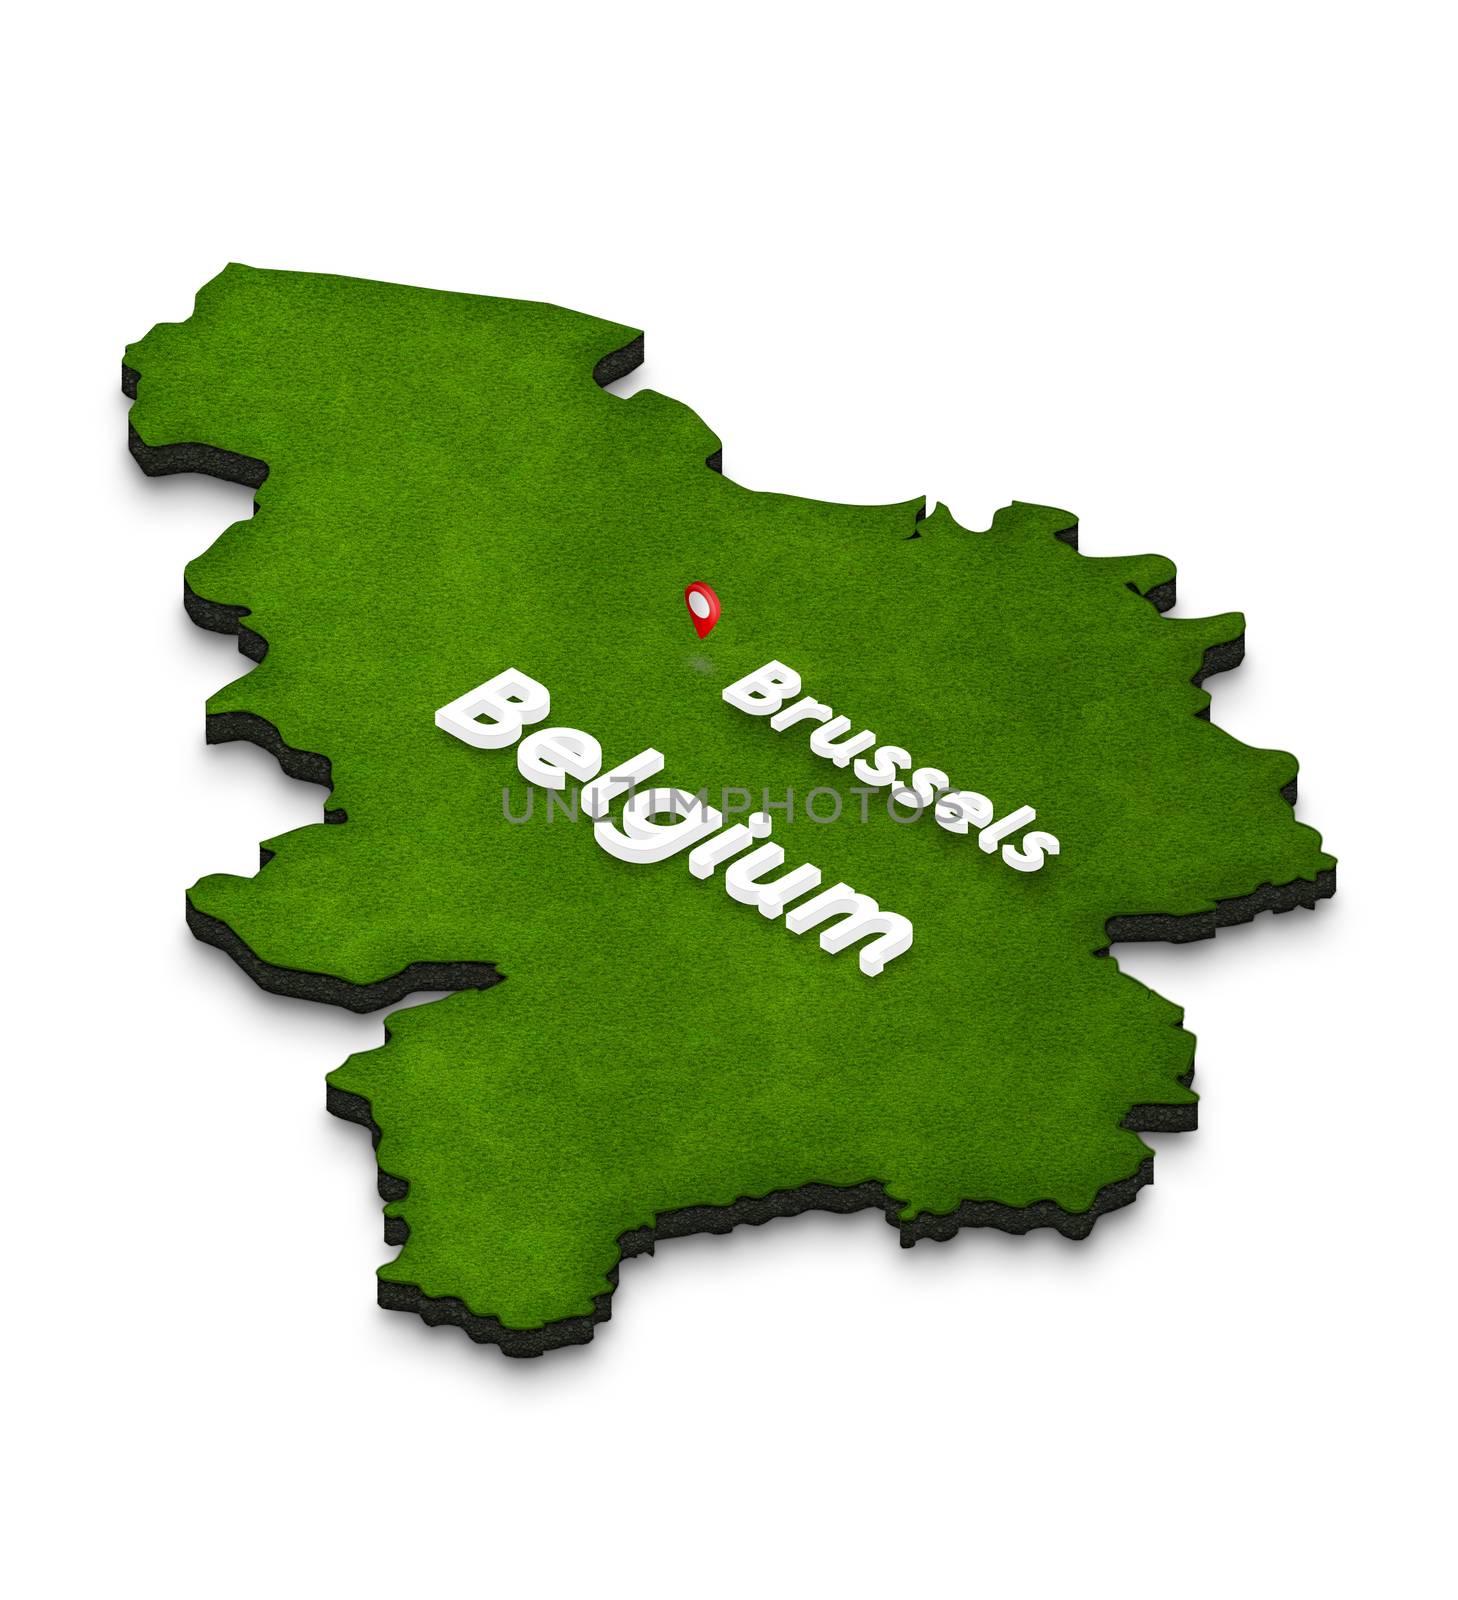 Illustration of a green ground map of Belgium on white isolated background. Left 3D isometric perspective projection with the name of country and capital Brussels.